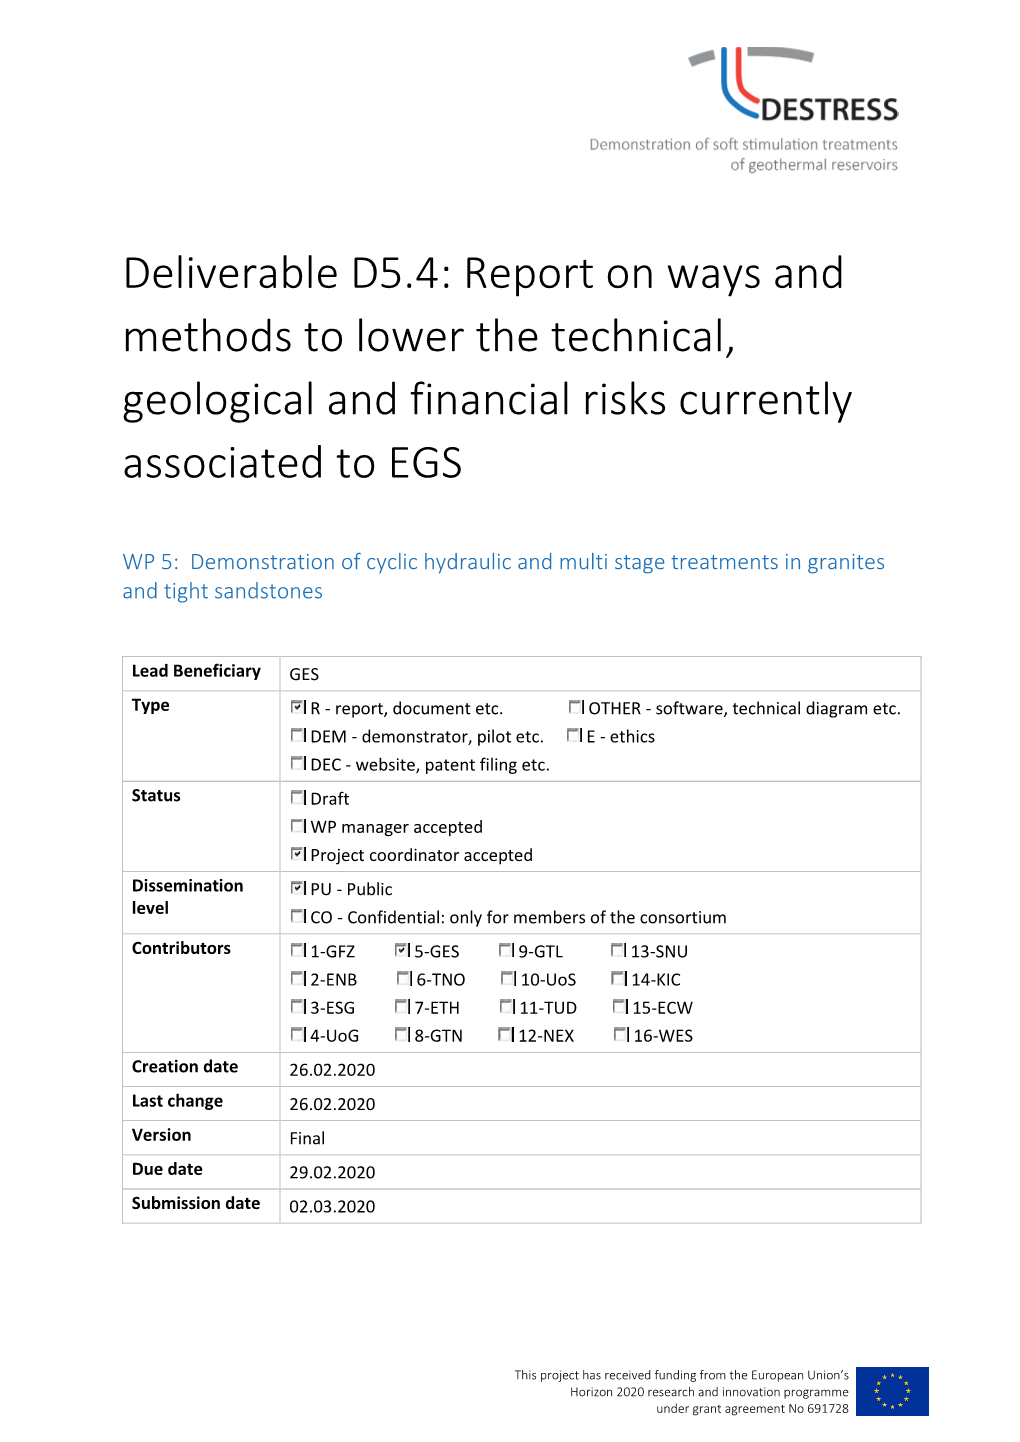 Deliverable D5.4: Report on Ways and Methods to Lower the Technical, Geological and Financial Risks Currently Associated to EGS